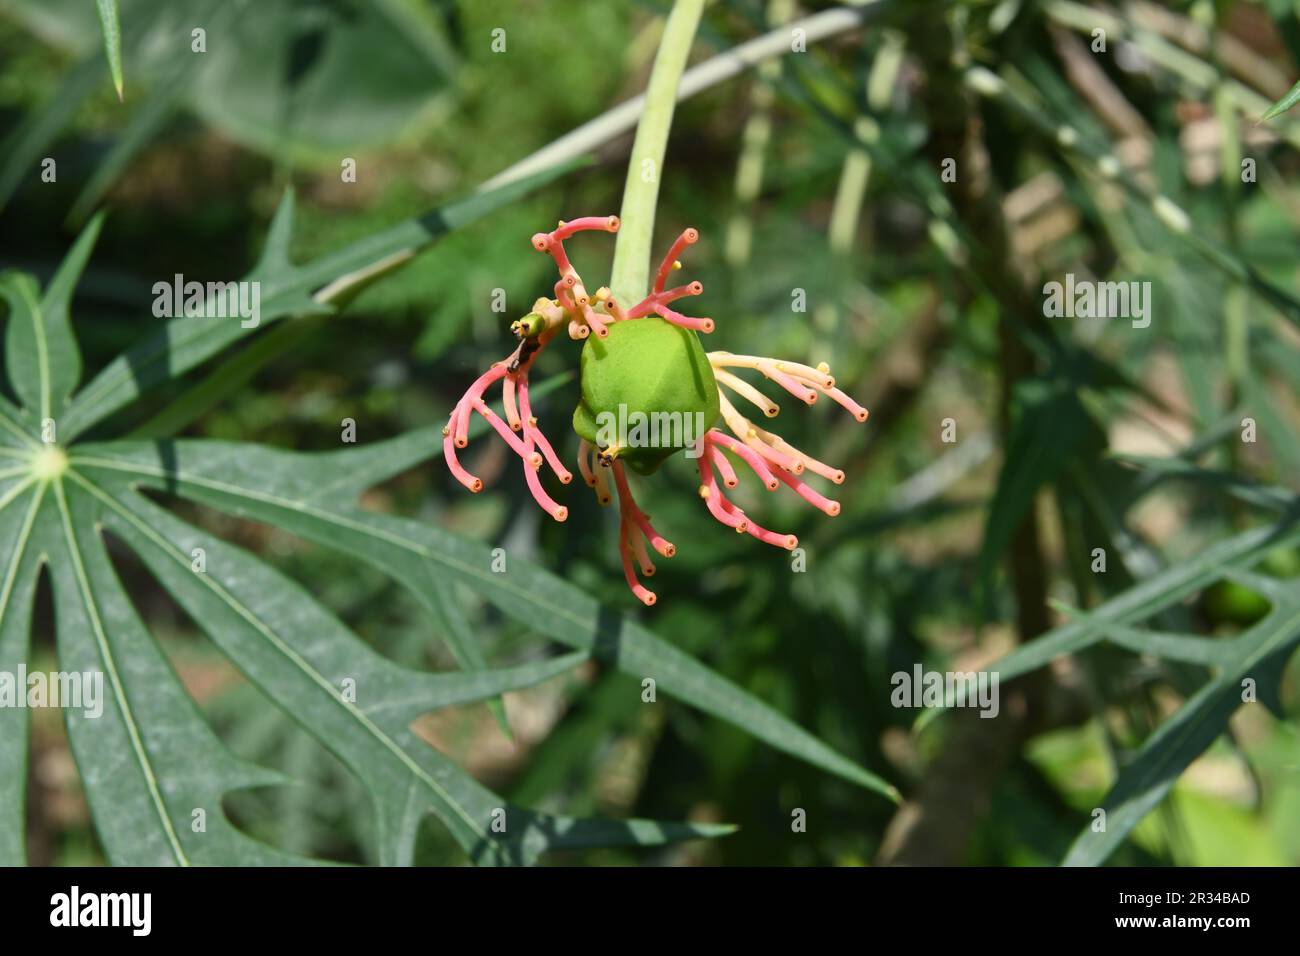 Close up of a green fruit and remaining stems which not developed into flowers of a Coral plant (Jatropha Multifida) flower inflorescence Stock Photo